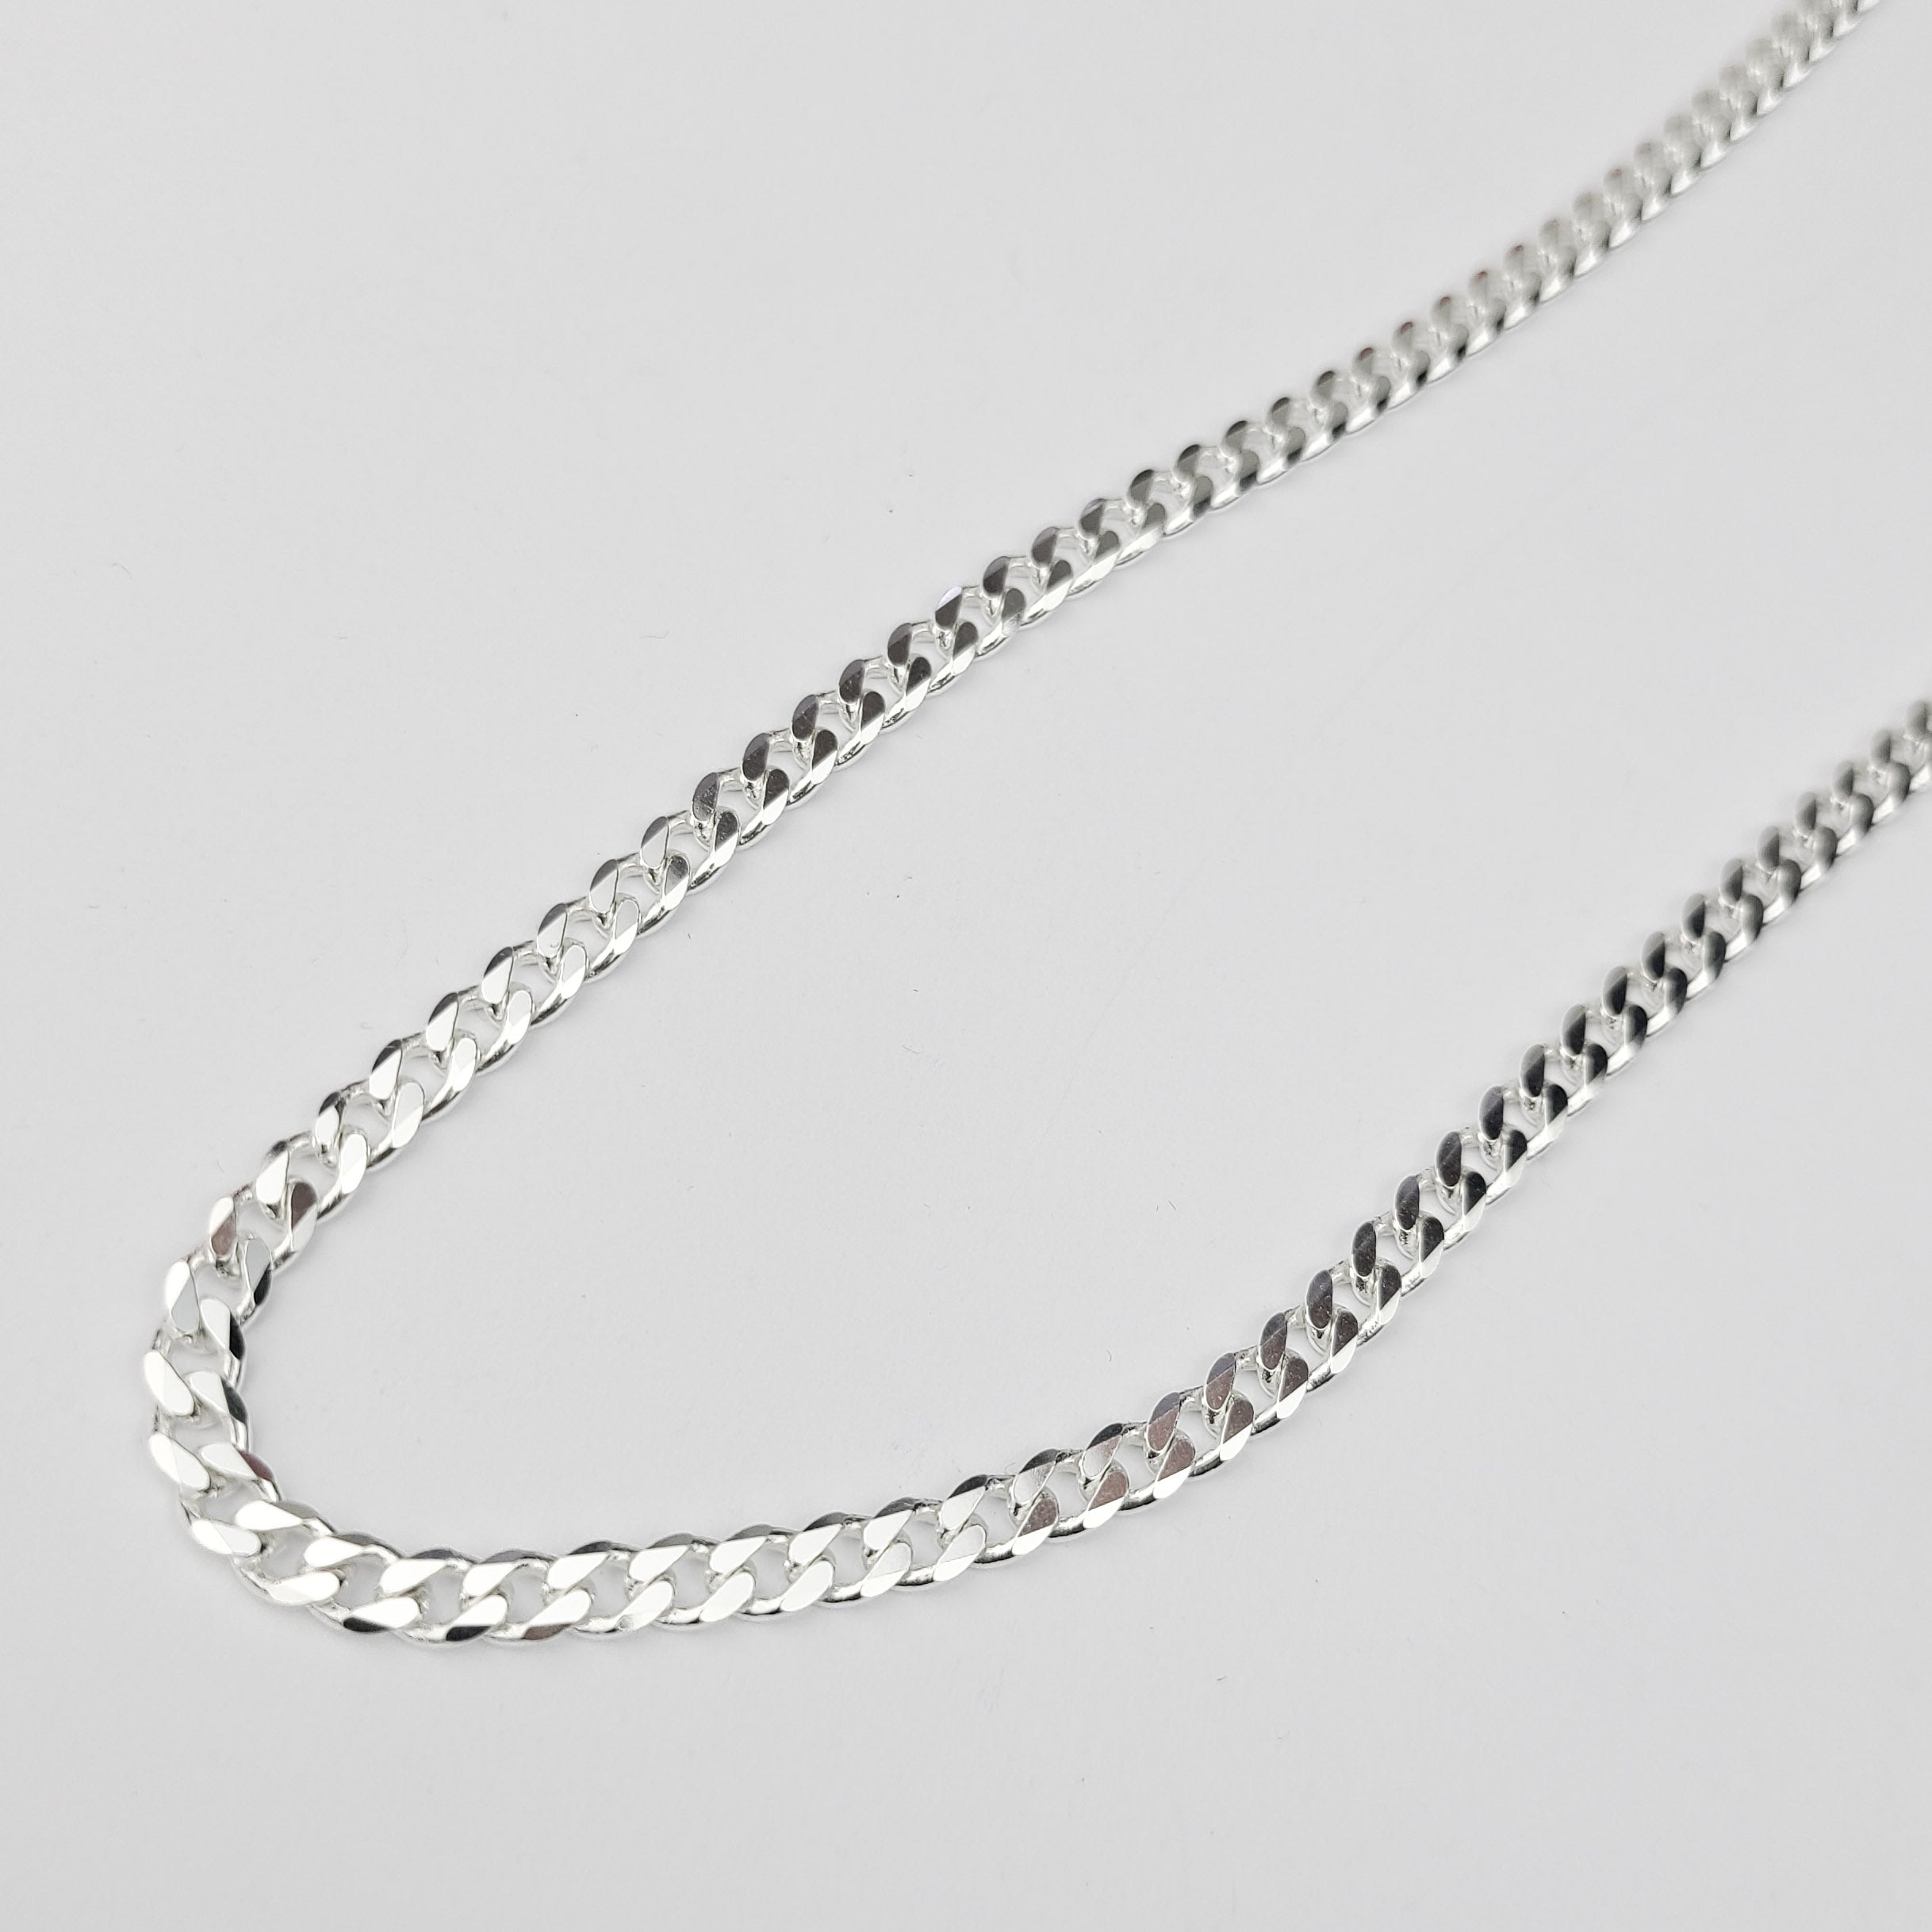 Wide 4.3mm Faceted Flat Curb Chain Necklace in Sterling Silver